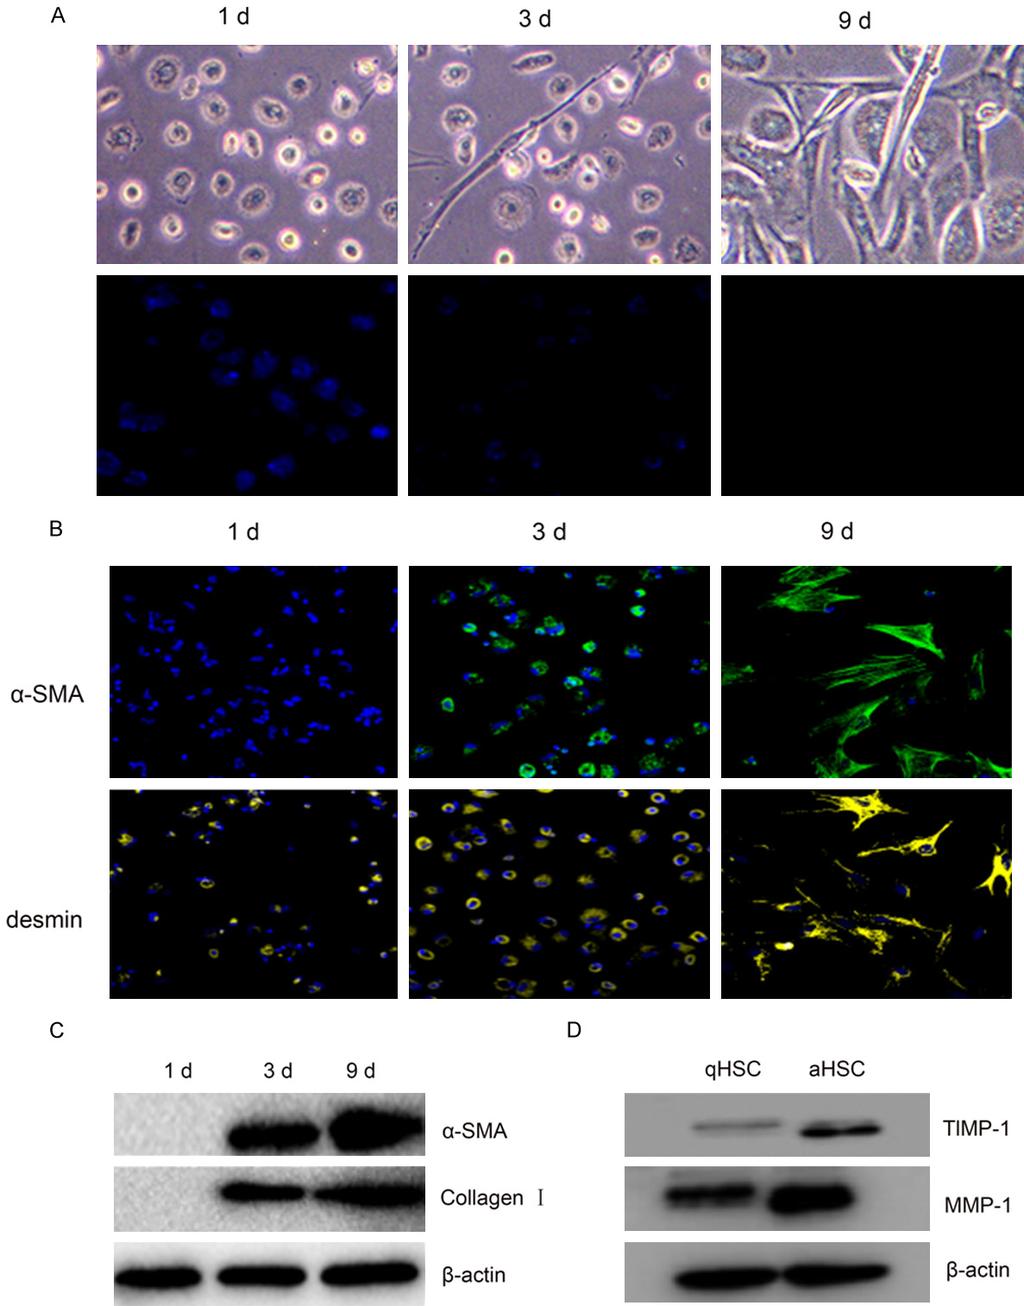 Figure 2. Induction of MMP-1 during HSC differentiation in vitro. Freshly isolated rat HSC after recovery for two to three days still retain some features of a quiescent phenotype.